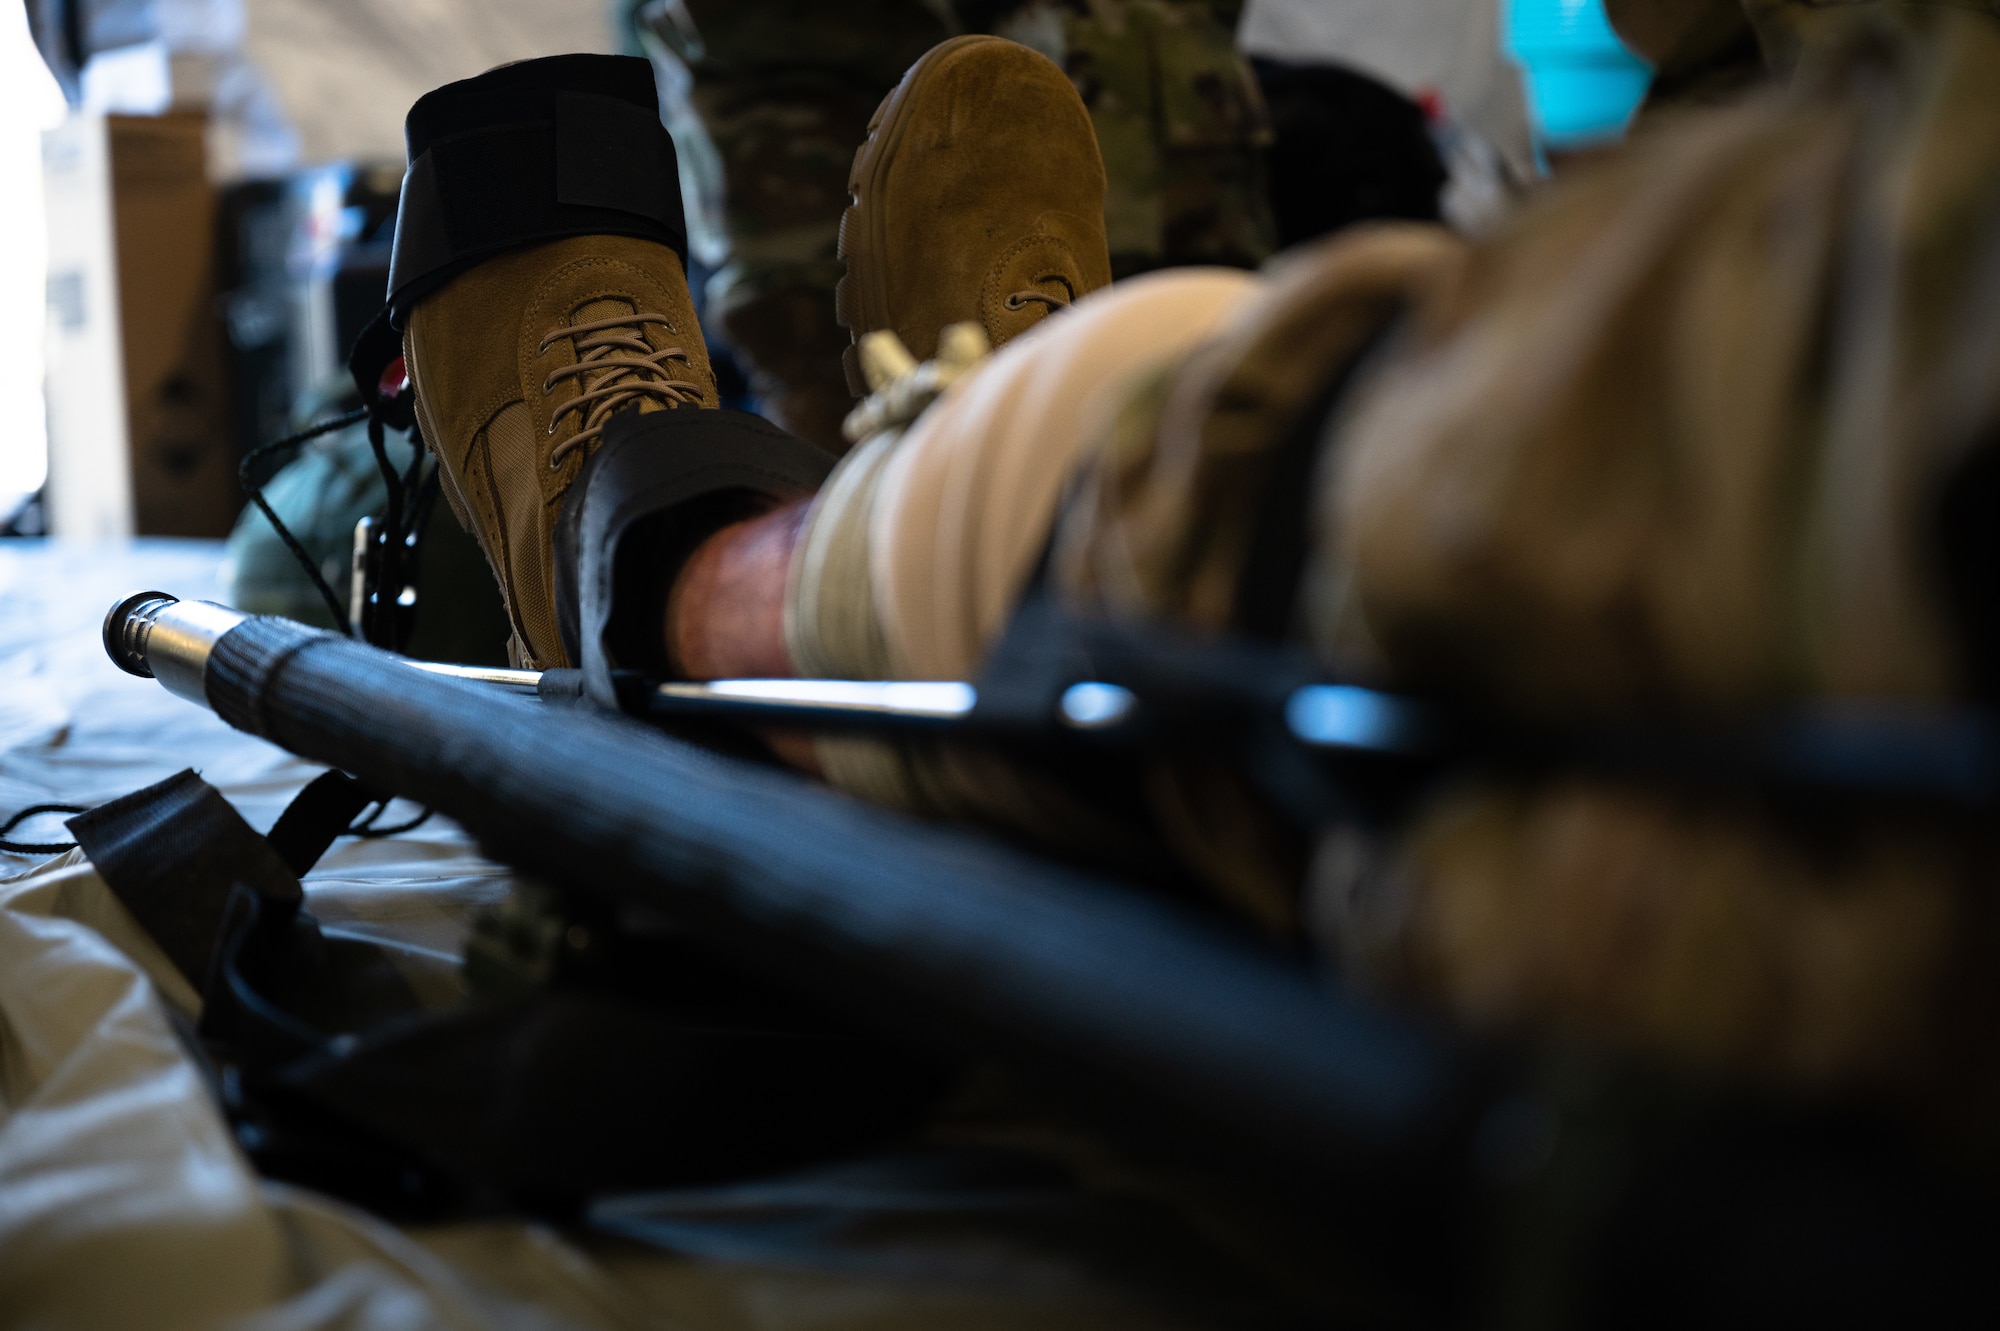 A U.S. Airman assigned to the 354th Fighter Wing acts as a simulated trauma patient during a Capabilities-Based Assessment (CBA) at the Yukon Training Area, Sept. 14, 2021.